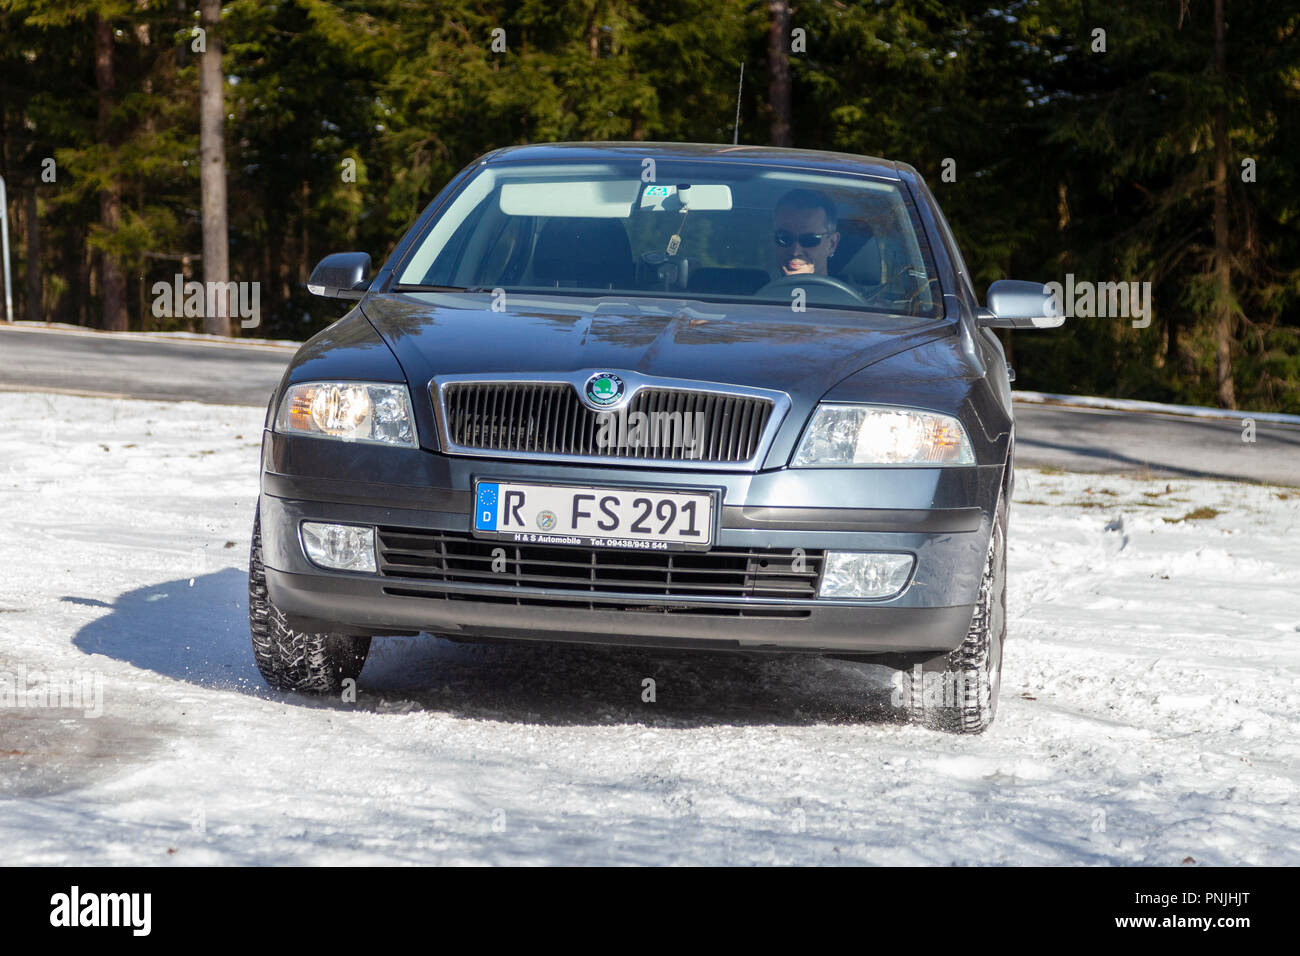 MUNICH / GERMANY - FEBRUARY 22, 2018: Skoda Octavia drives off road on a snow track. The Octavia is a small family car produced by the Czech manufactu Stock Photo